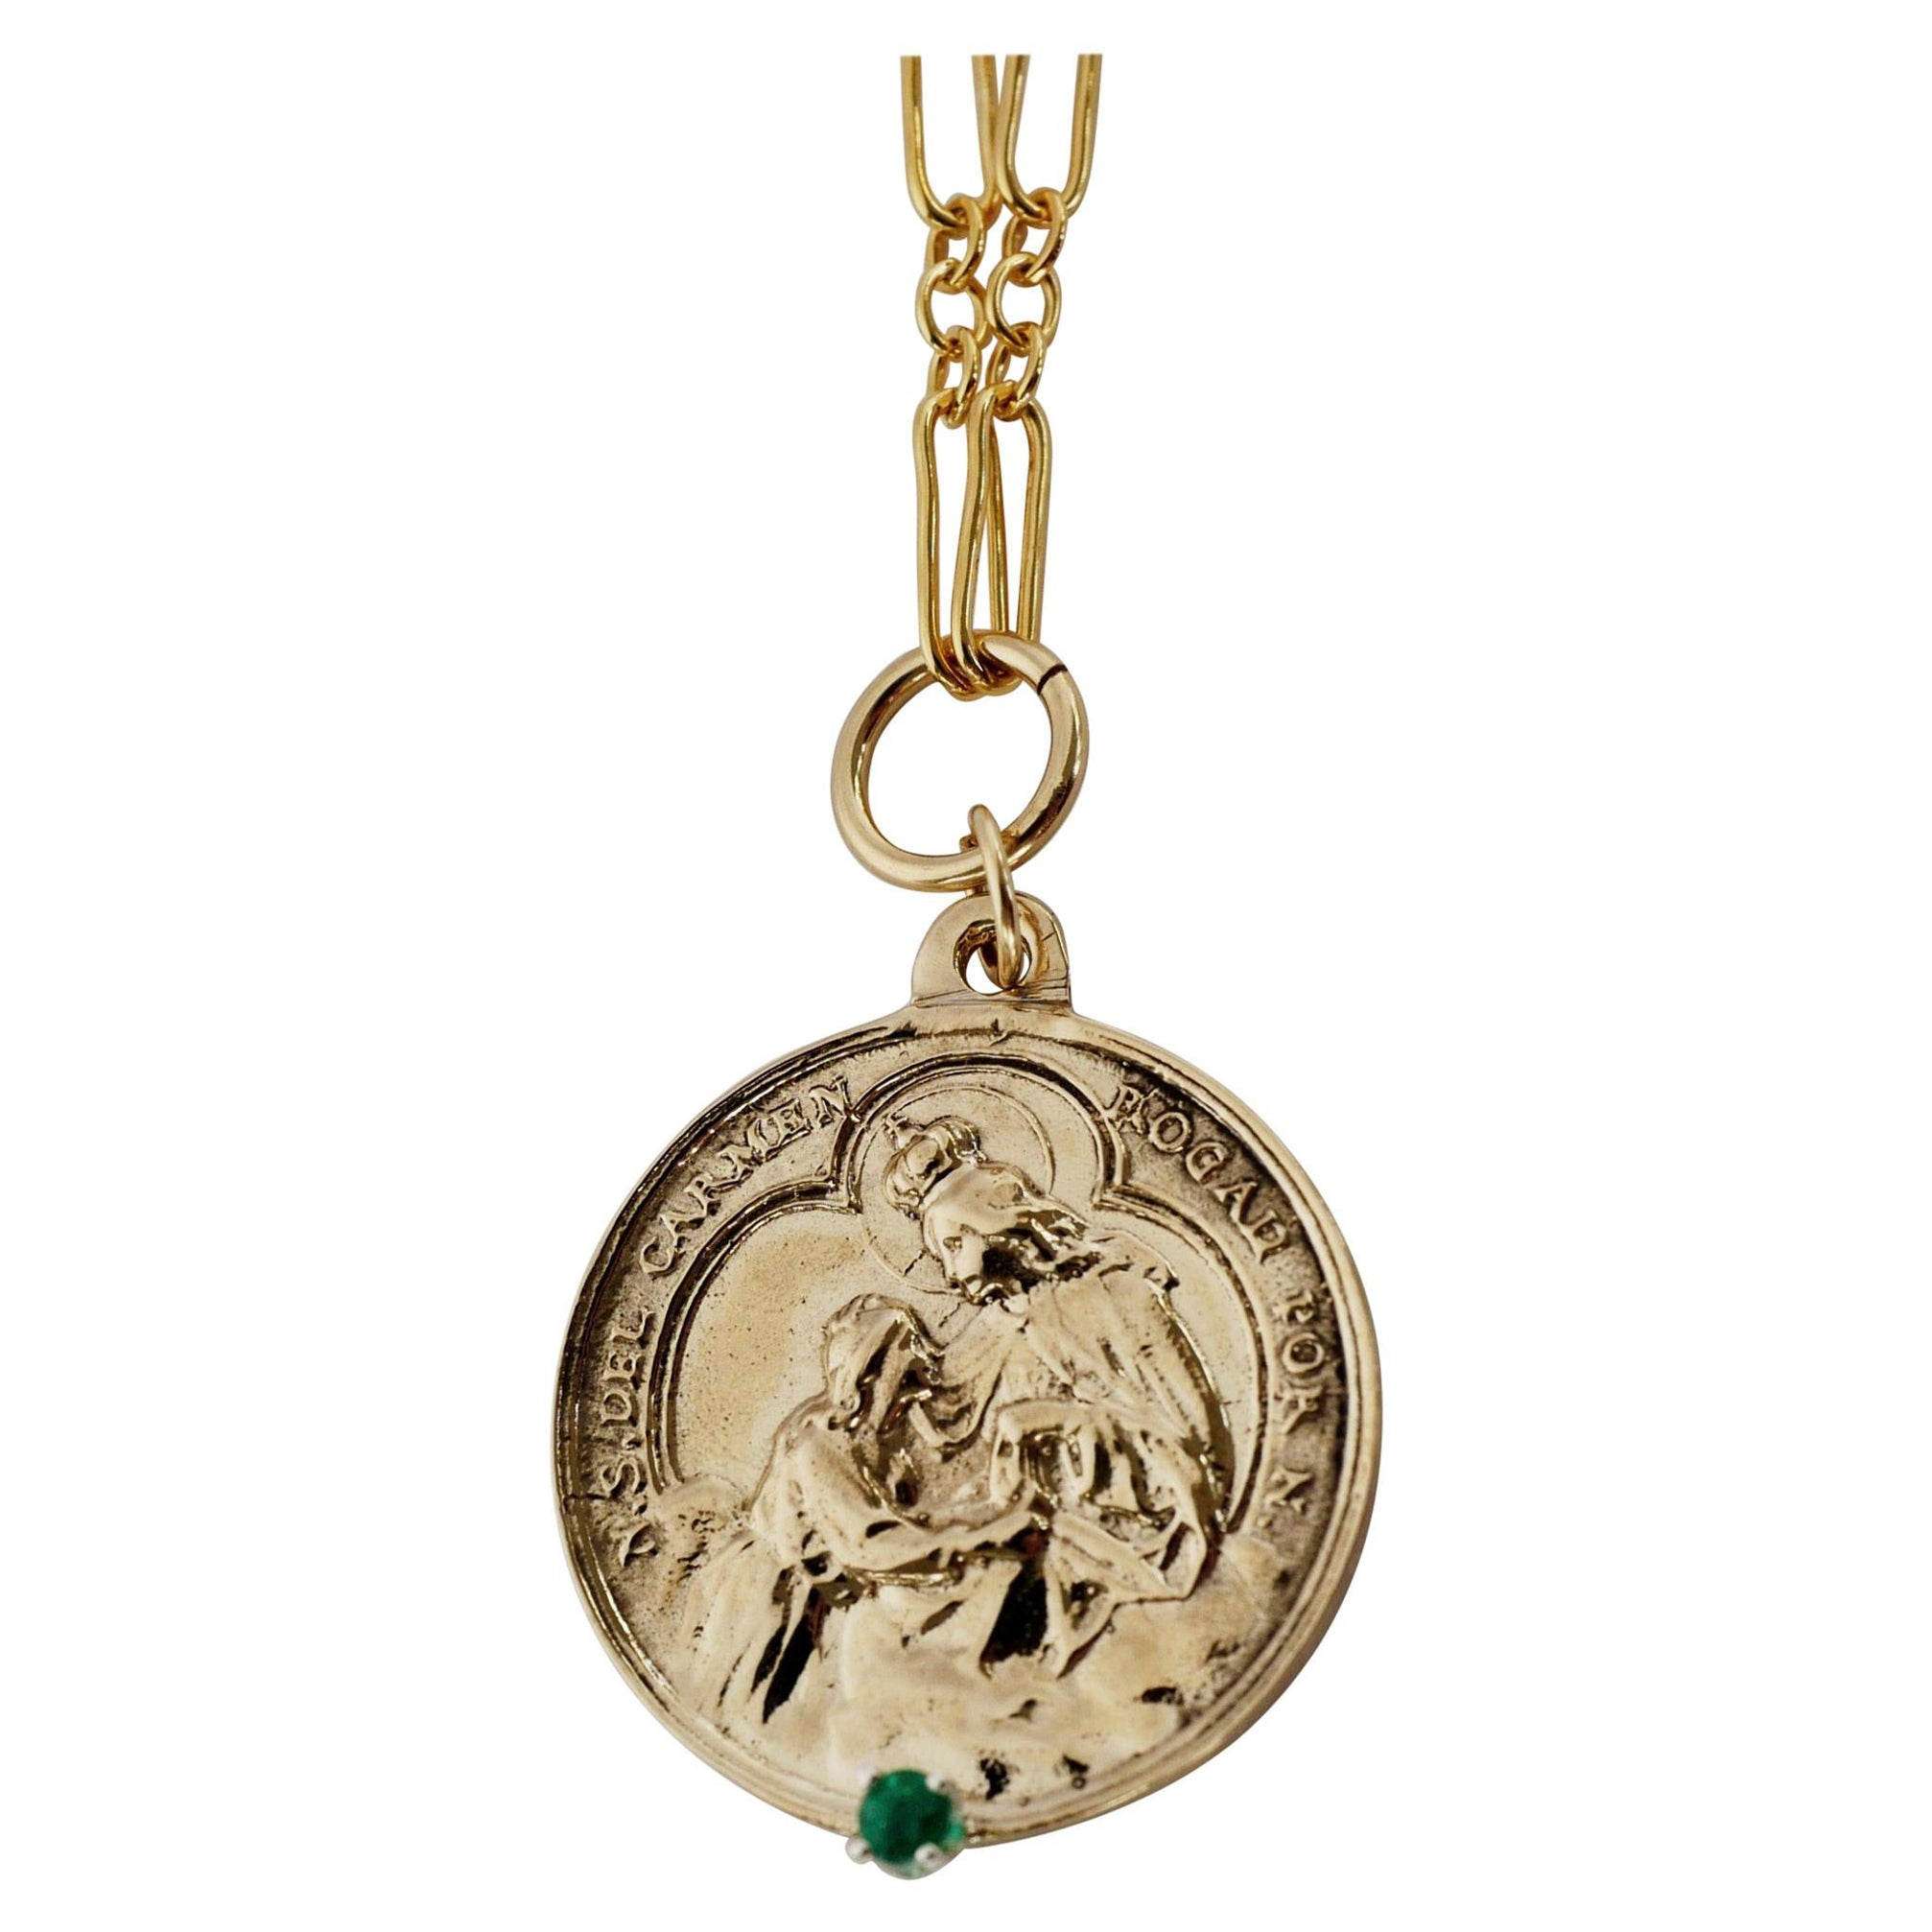 Emerald Virgin Mother Mary Medal Chunky Chain Necklace Gold tone J Dauphin